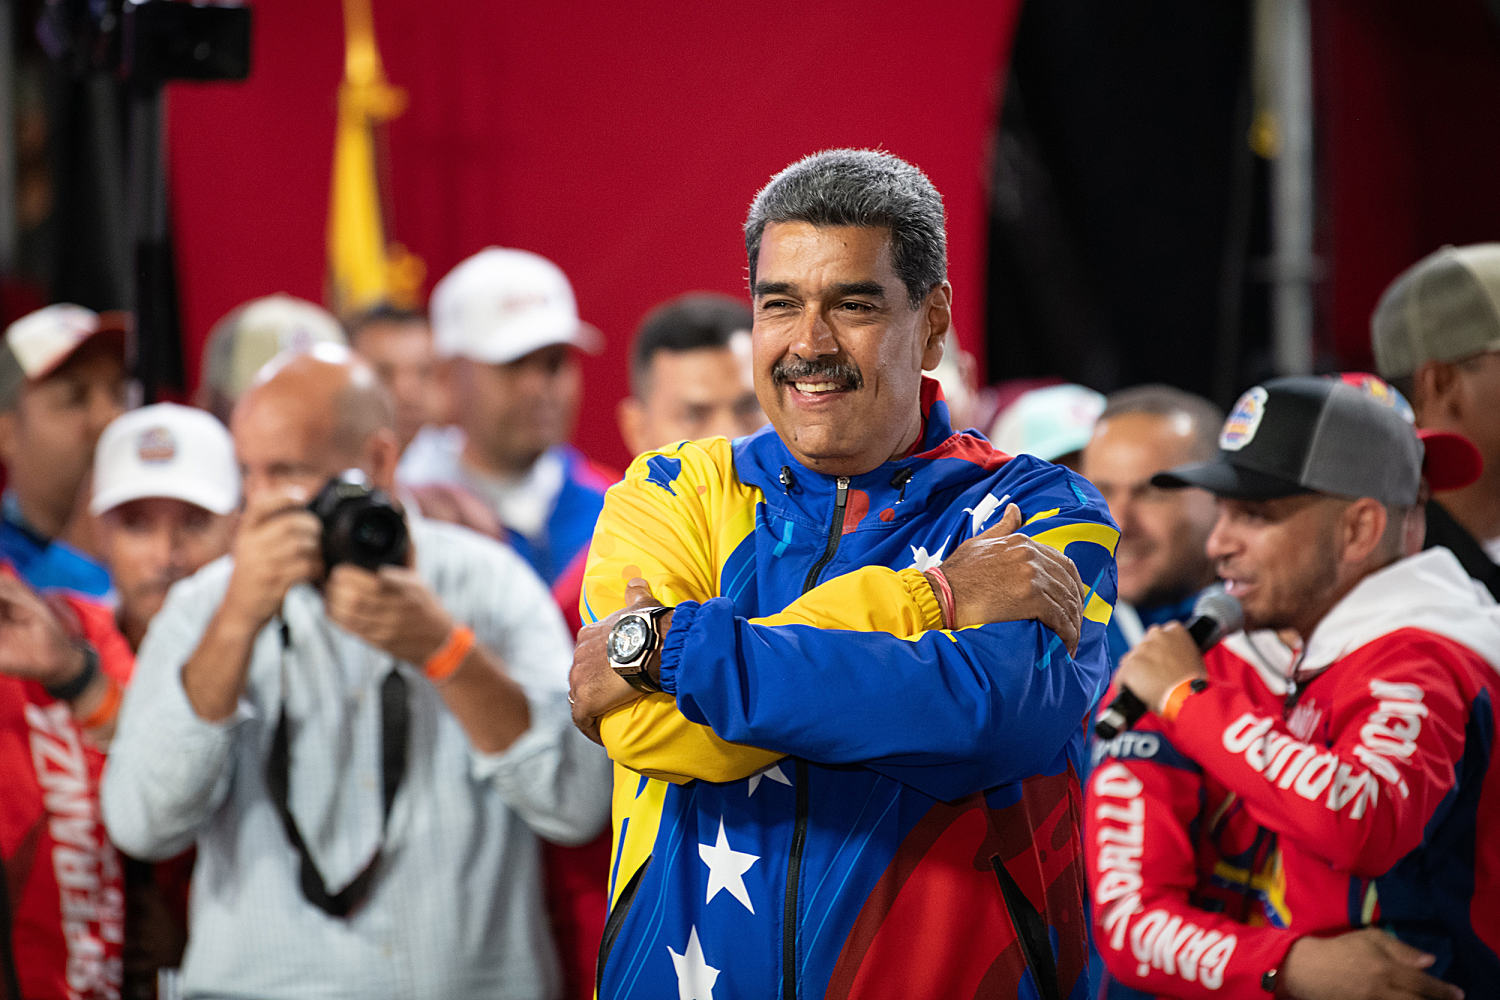 Doubts cloud Venezuela's election results as both Maduro and the opposition declare victory